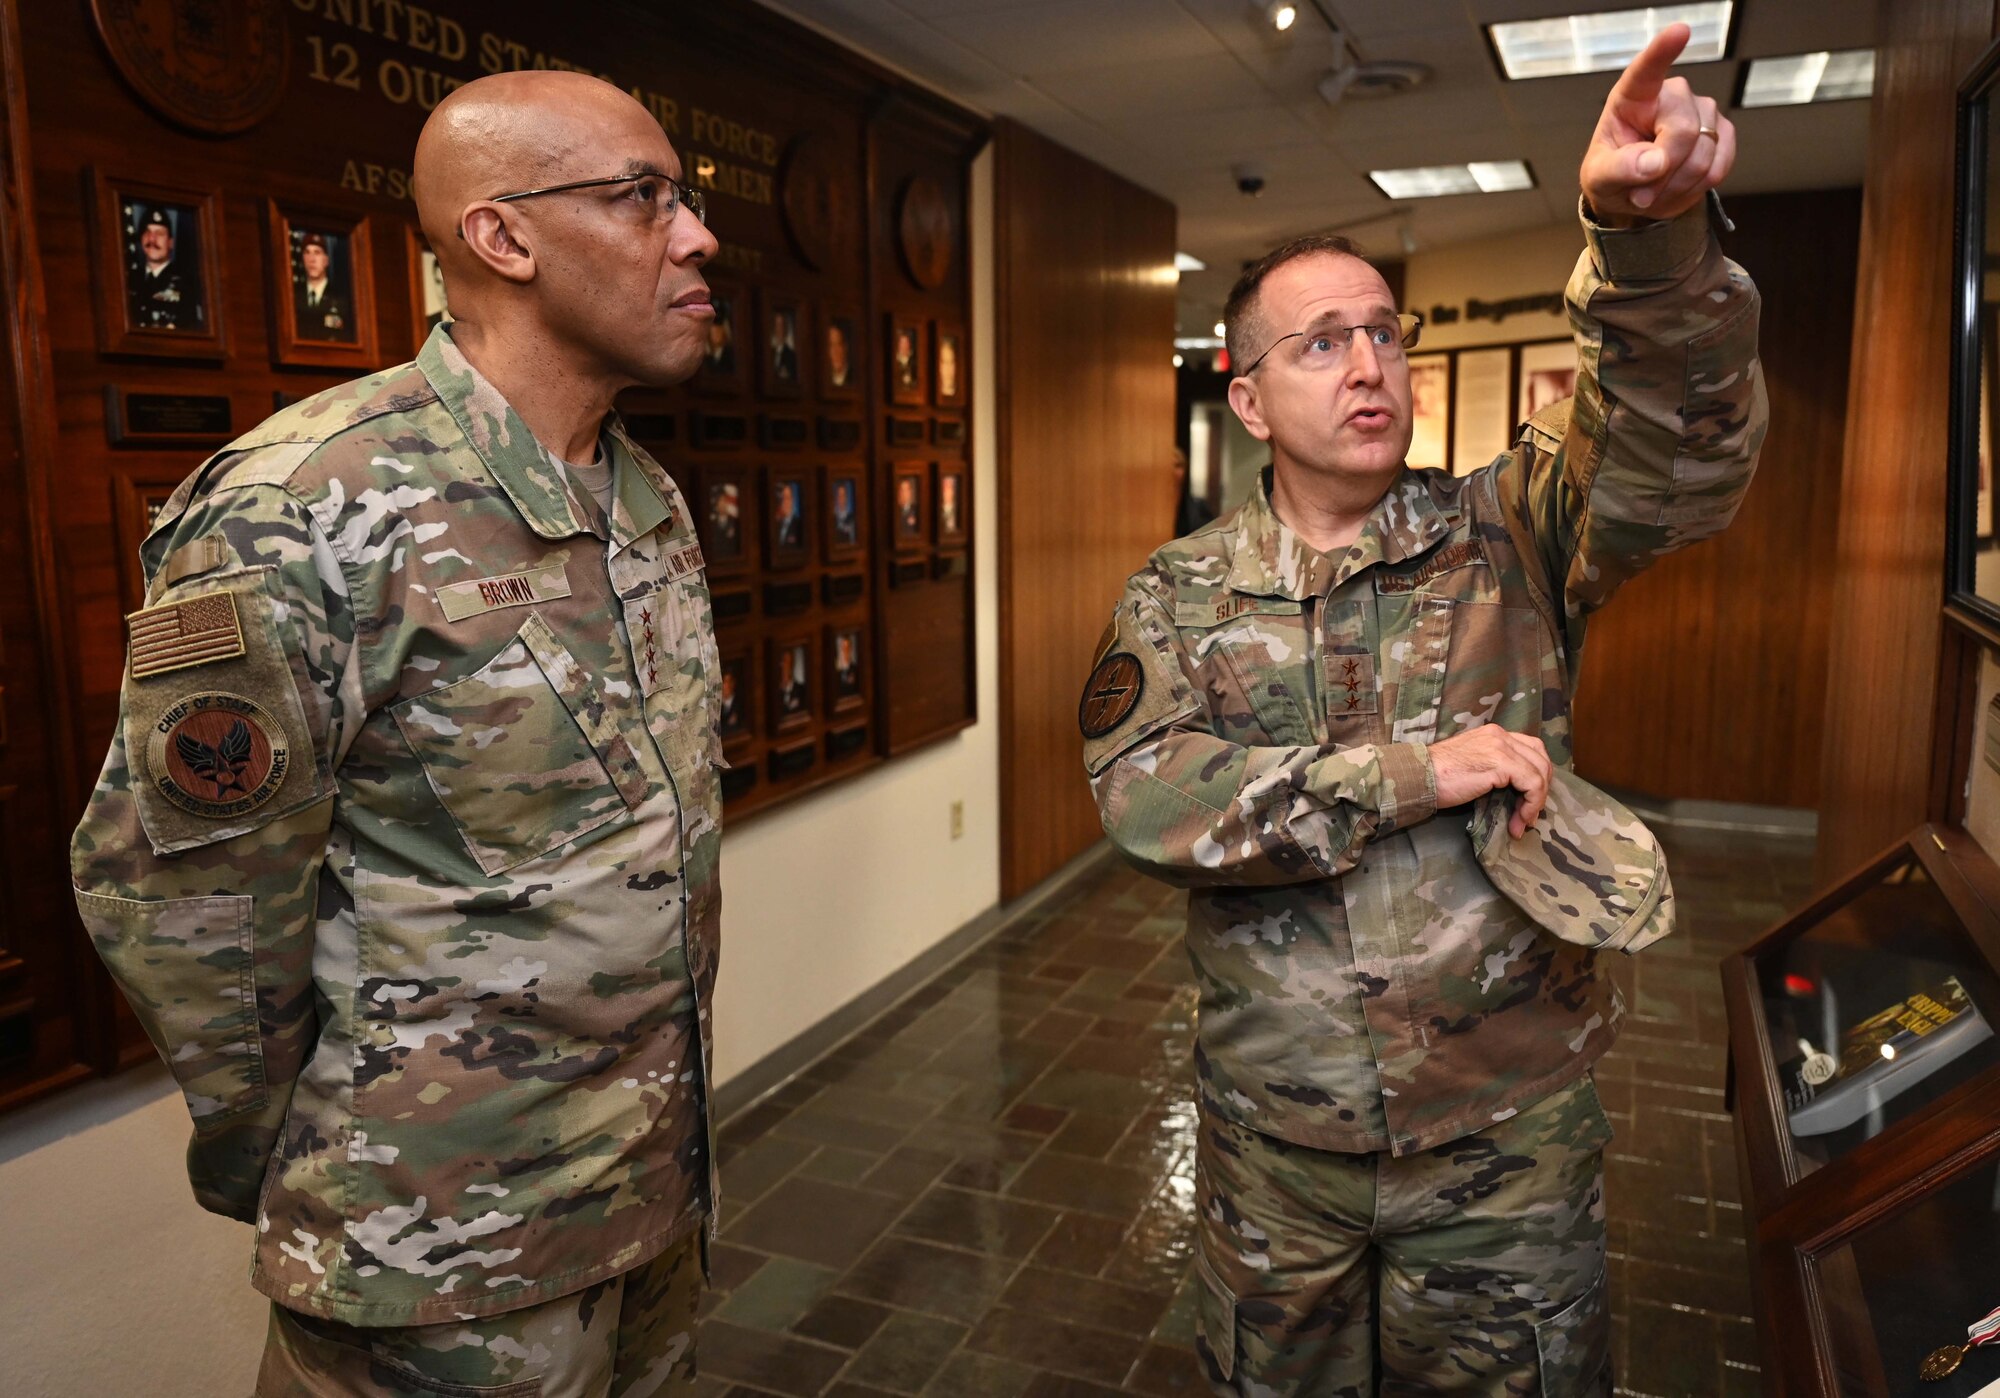 Air Force Chief of Staff Gen. CQ Brown, Jr., left, receives a headquarters tour from U.S. Air Force Lt. Gen. Jim Slife, right, commander of Air Force Special Operations Command, during a visit to Hurlburt Field, Florida, April 4, 2022. During his visit, Brown met with junior enlisted Airmen and received command updates from Headquarters AFSOC staff and briefings on Mission Sustainment Teams, Aviation Special Operations Task Units and Special Operations Task Groups. (U.S. Air Force photo by Staff Sgt. Brandon Esau)